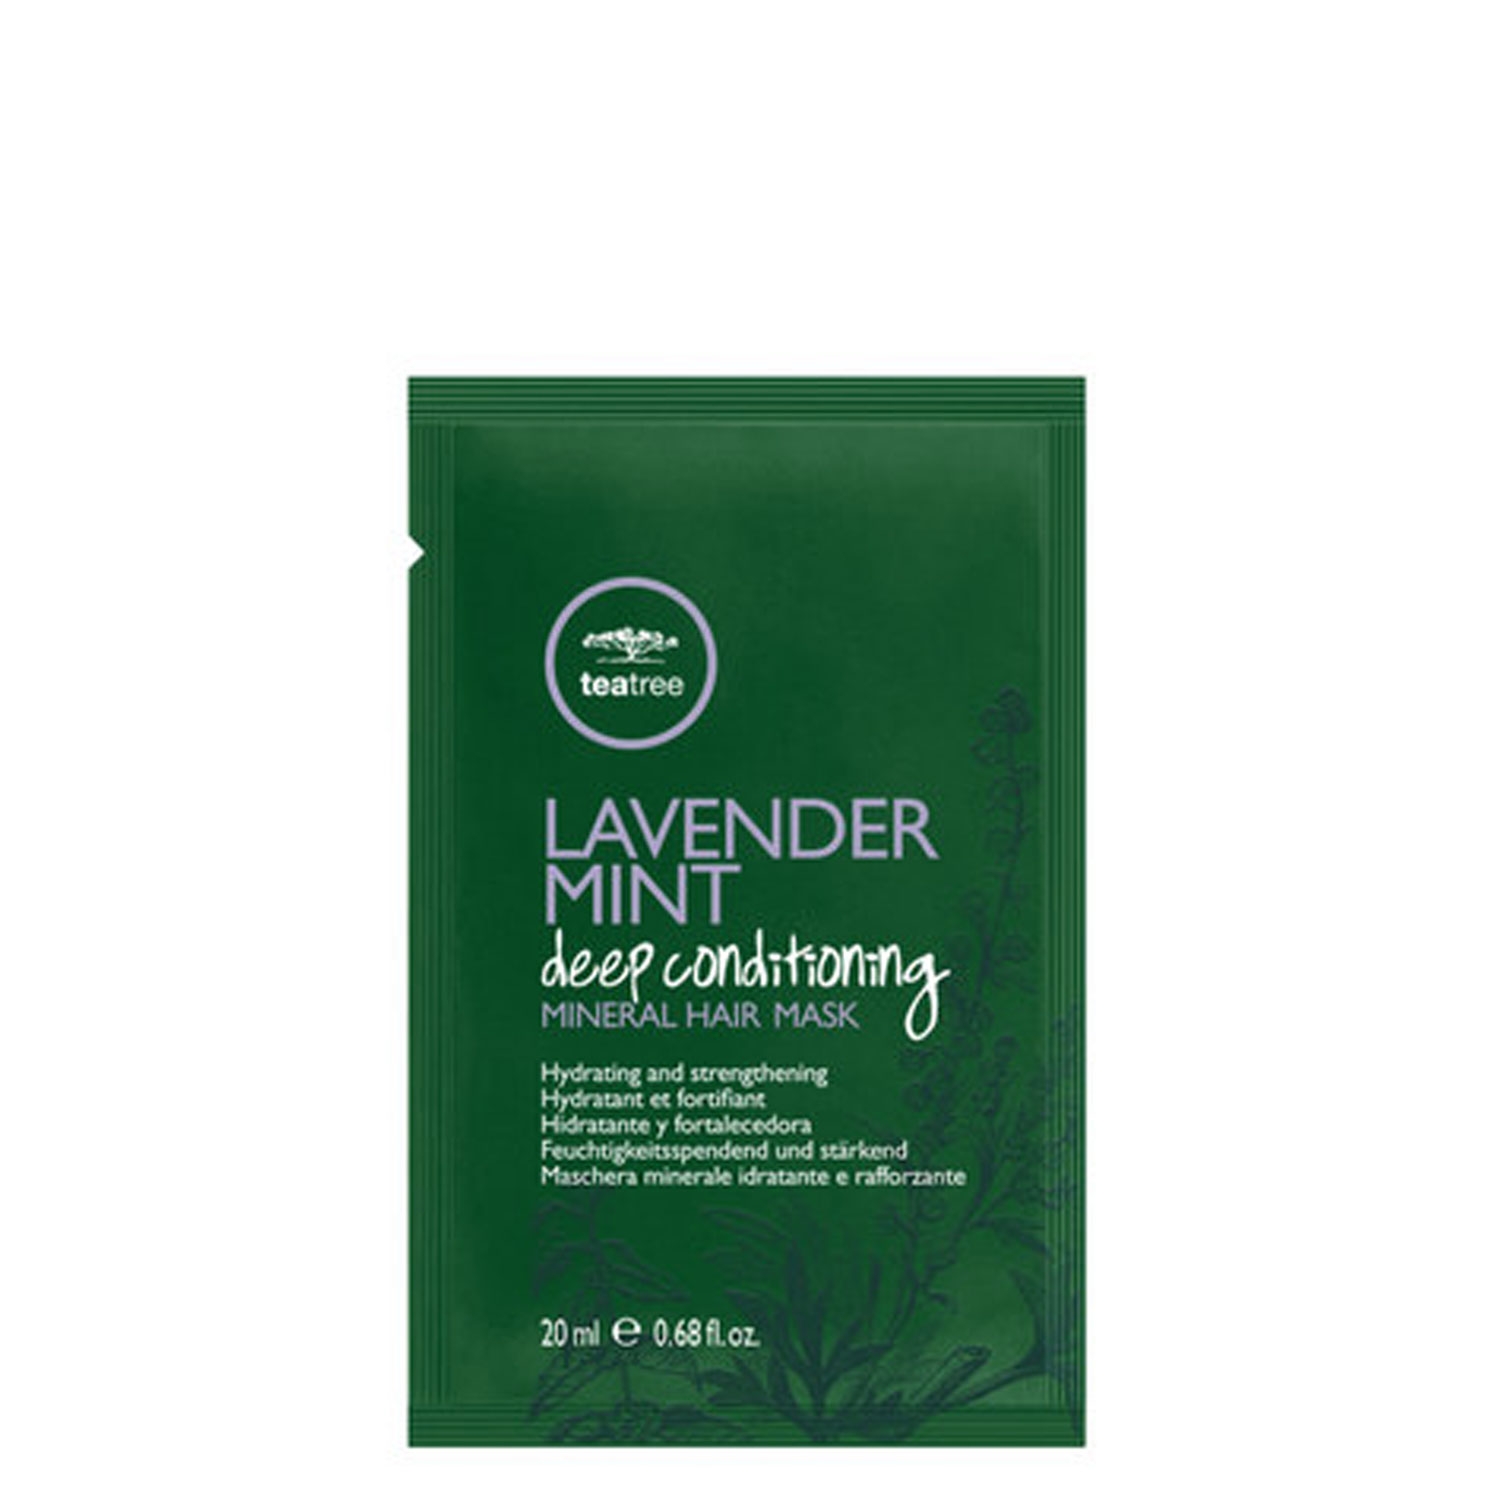 Product image from Tea Tree Lavender Mint - Deep Conditioning Mineral Hair Mask